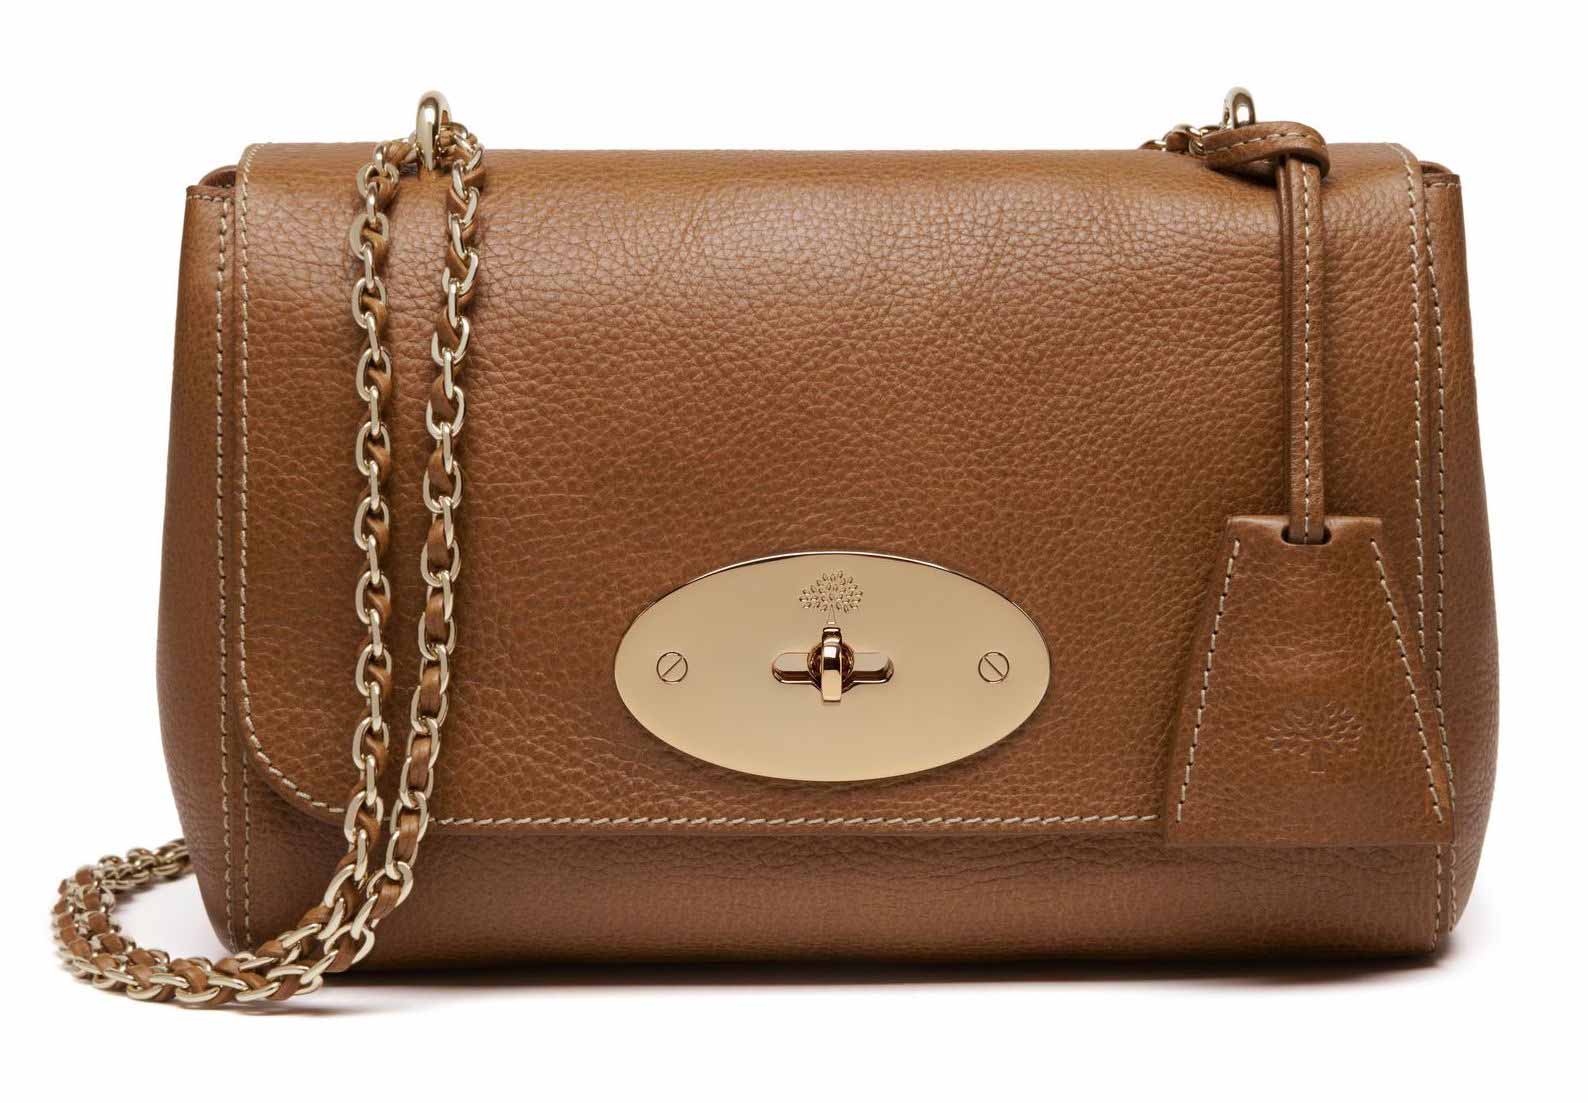 4 Most Popular Mulberry Handbags and Purses of All Time